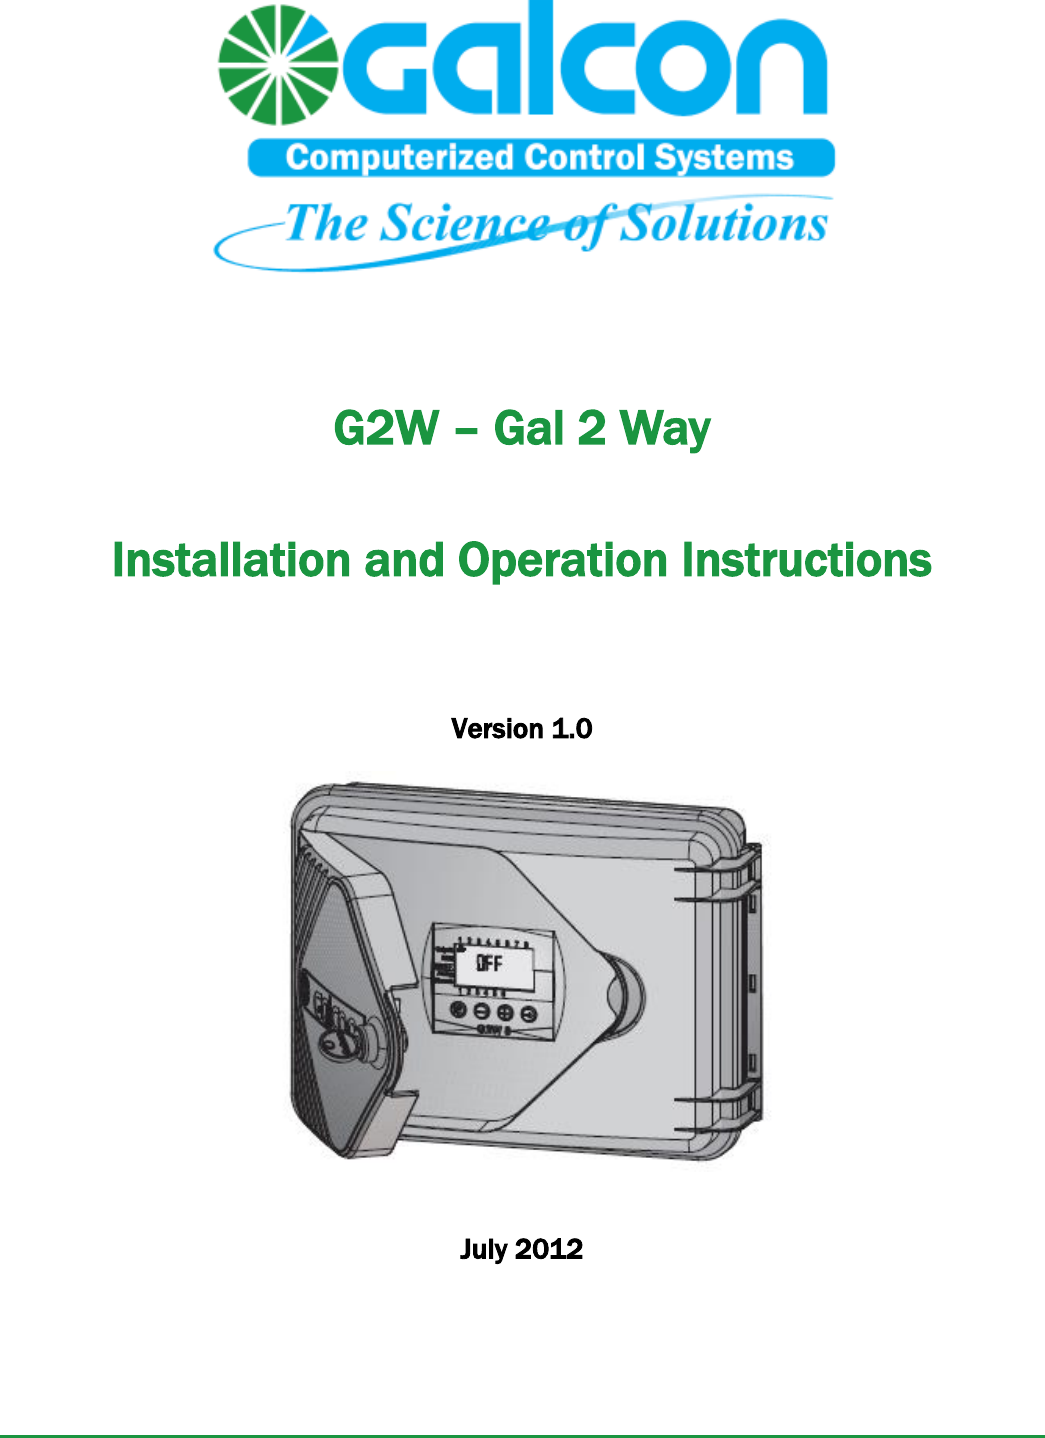      G2W – Gal 2 Way Installation and Operation Instructions  Version 1.0  July 2012  